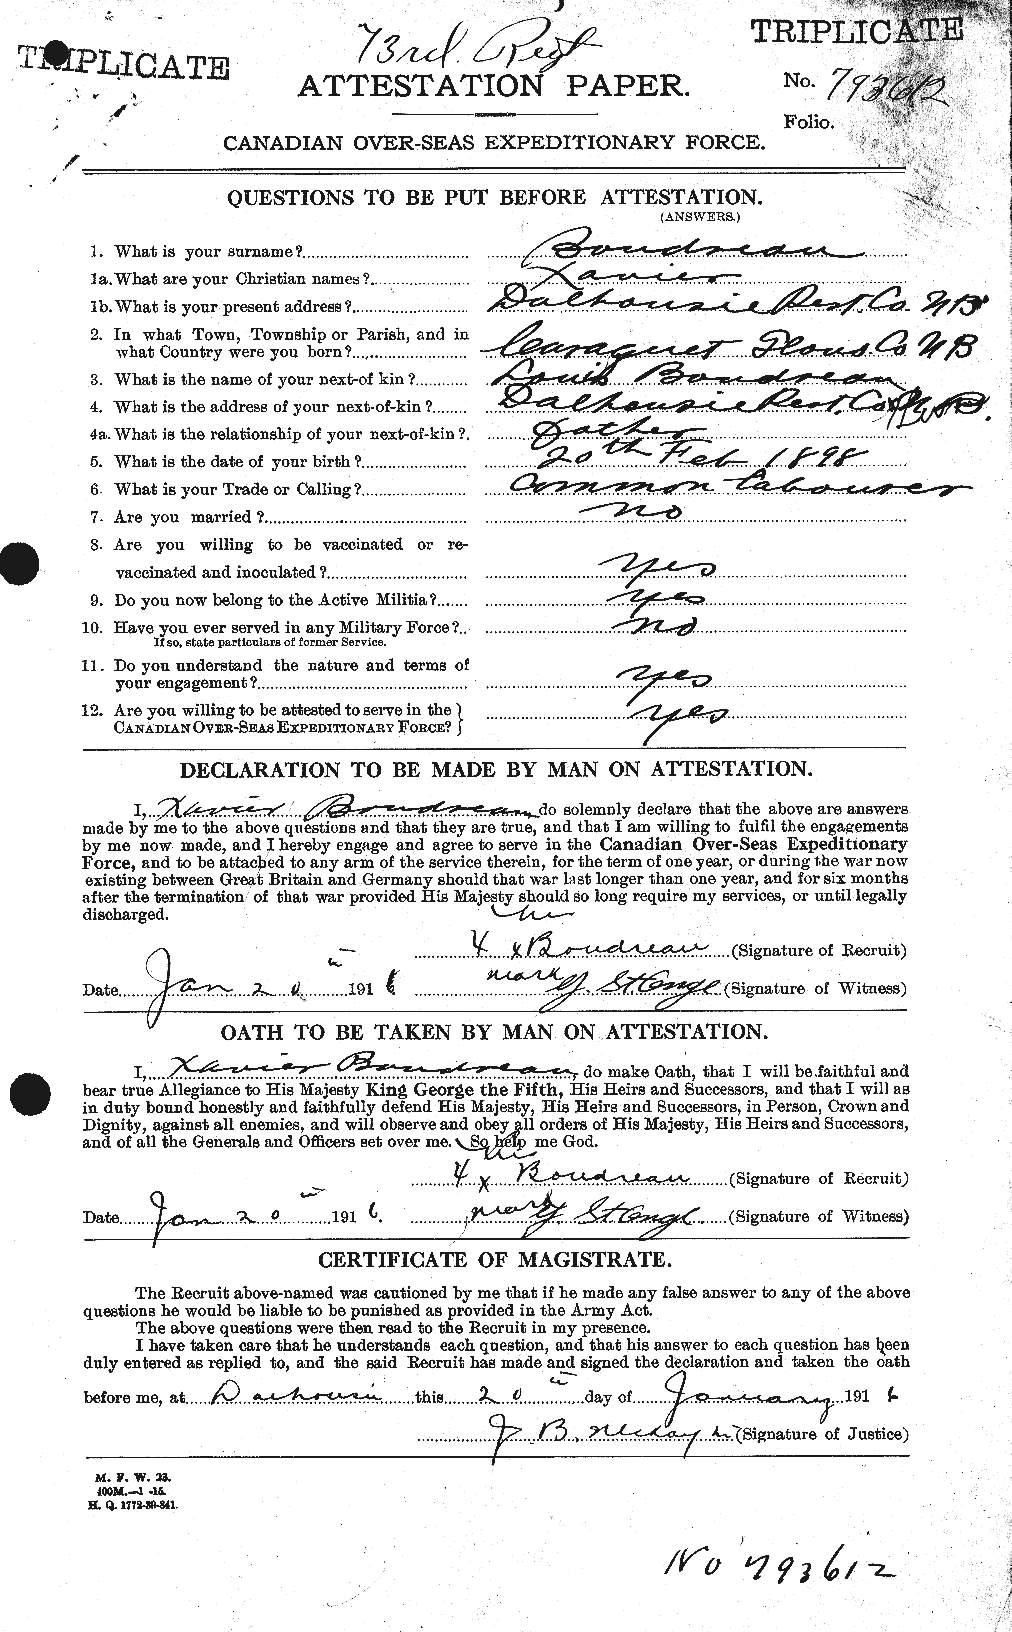 Personnel Records of the First World War - CEF 252579a